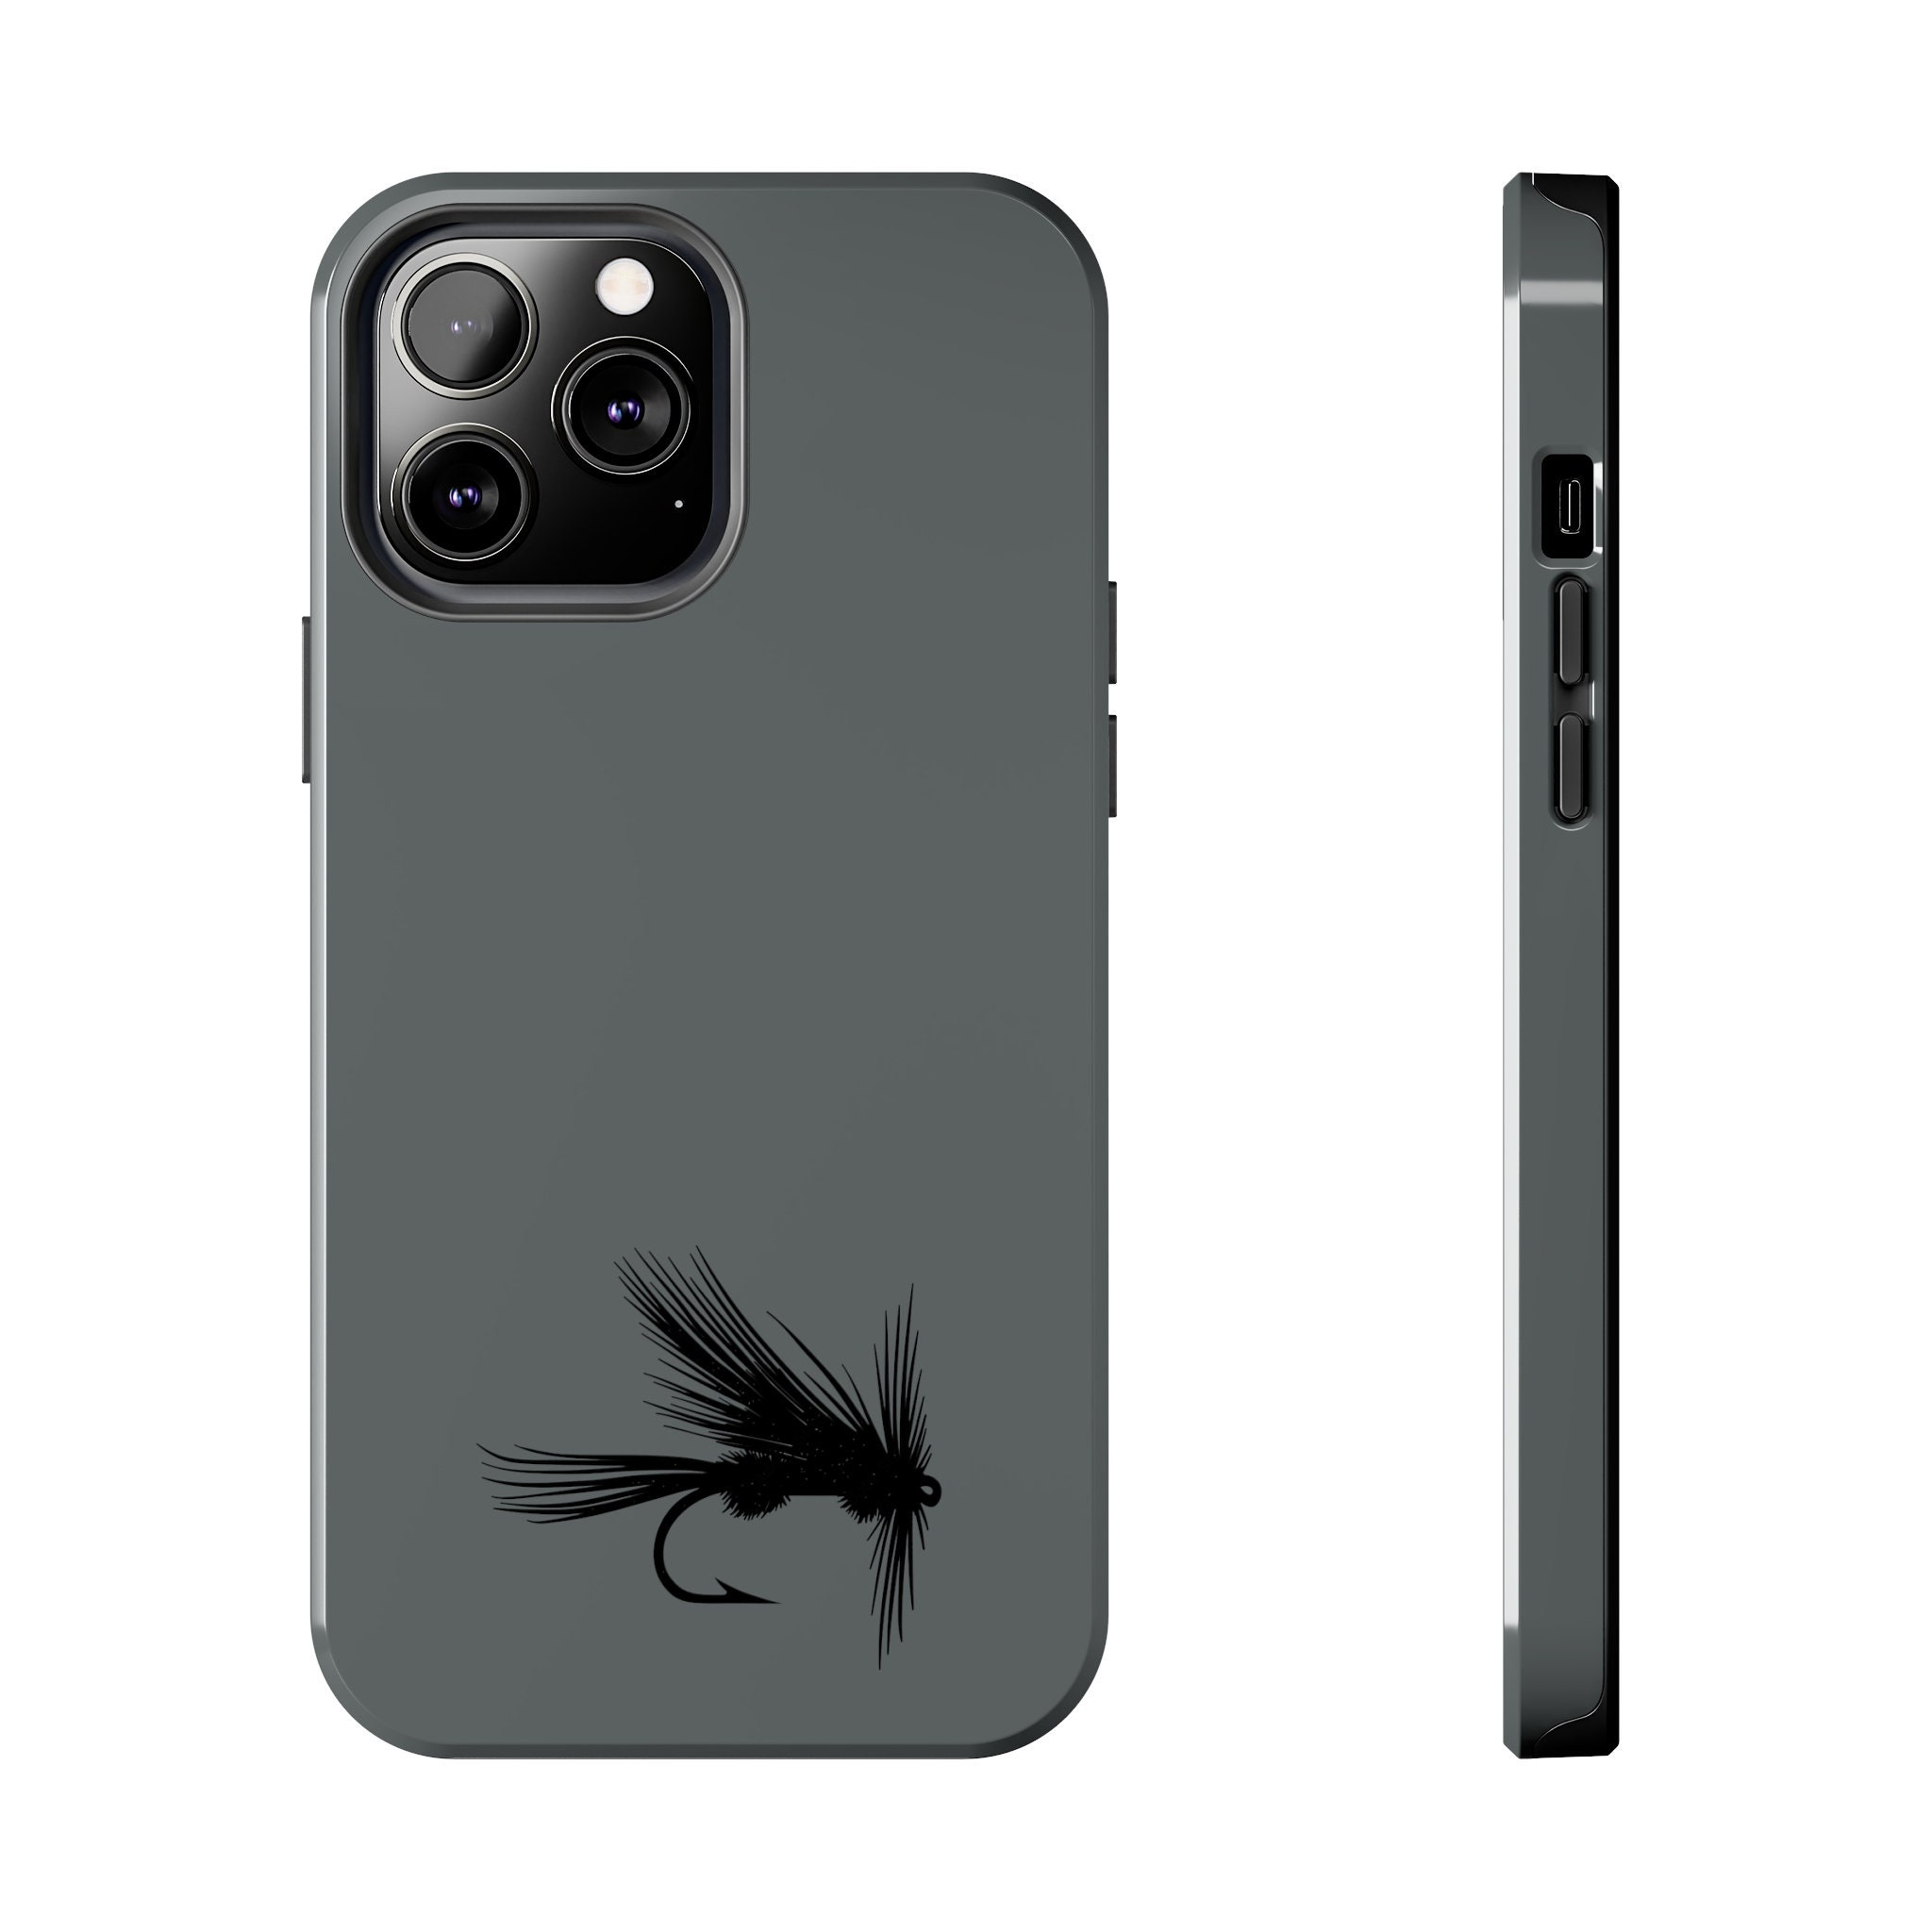 Fly Fishing iPhone 